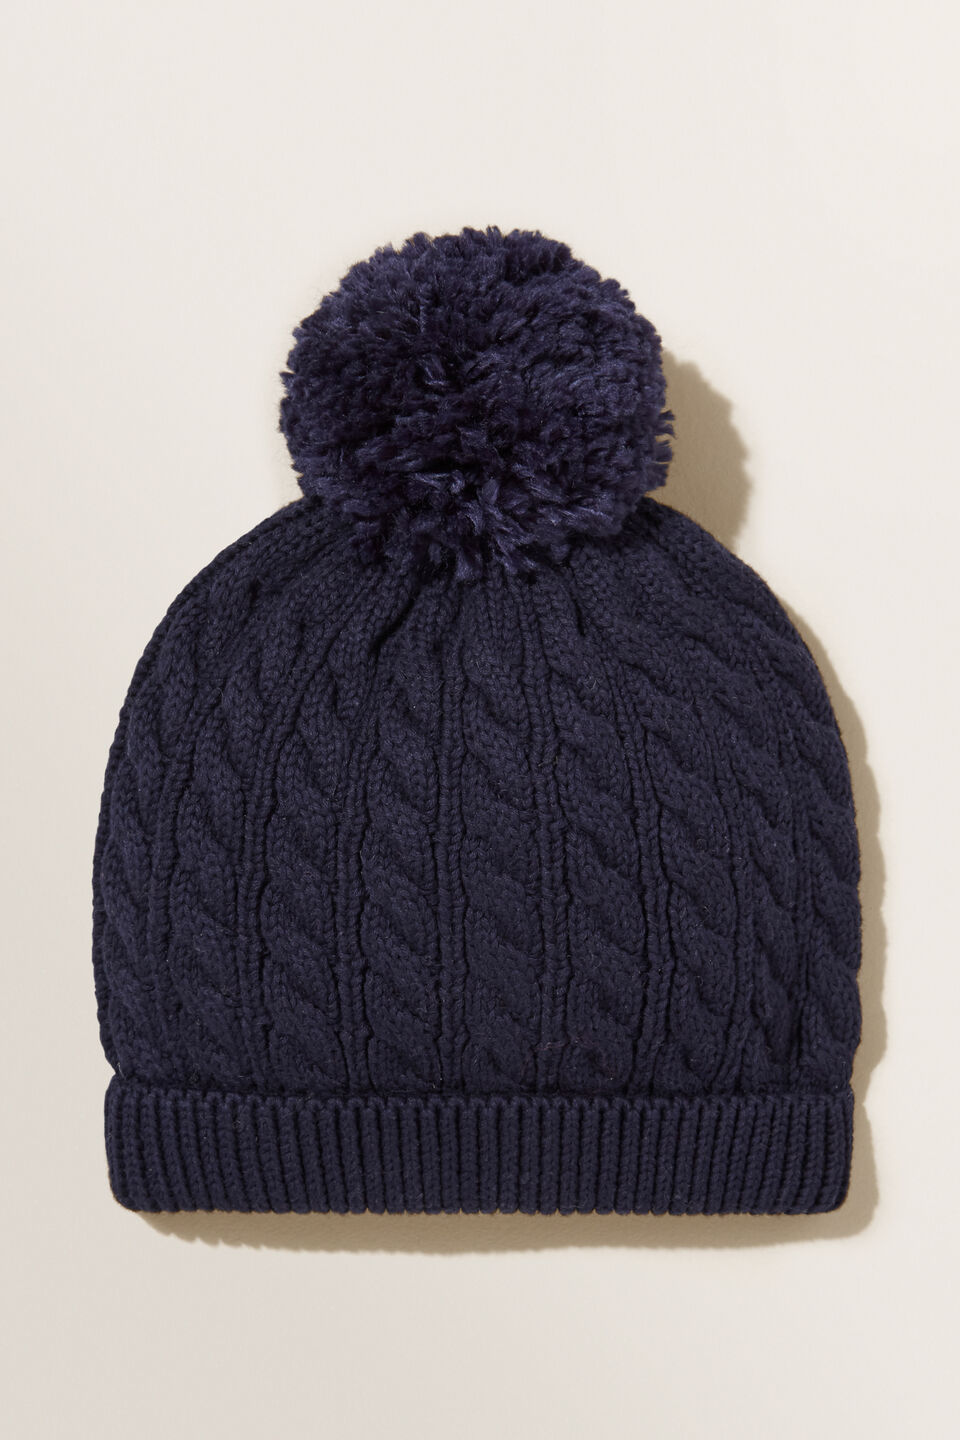 Midnight Blue Cable Knit Beanie  Midnight Blue